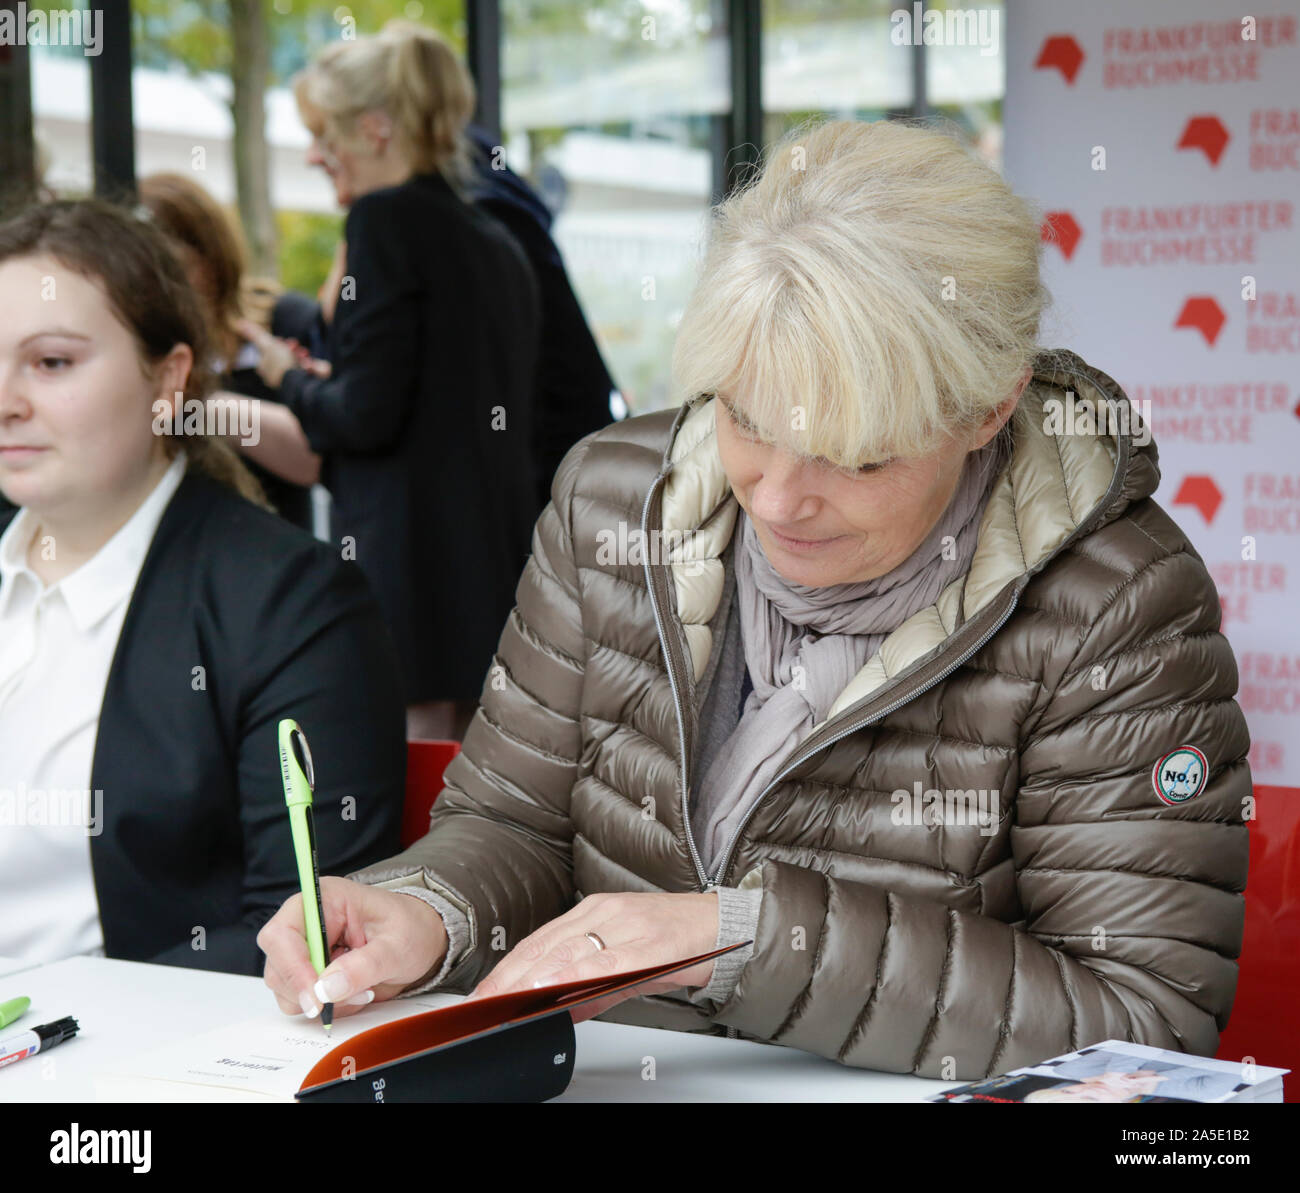 German crime writer Nele Neuhaus signs a book at the Frankfurt Book Fair. The 71th Frankfurt Book Fair 2019 is the world largest book fair with over 7,500 exhibitors and over 285,000 expected visitors. The Guest of Honour for the 2019 fair is Norway. (Photo by Michael Debets/Pacific Press) Stock Photo